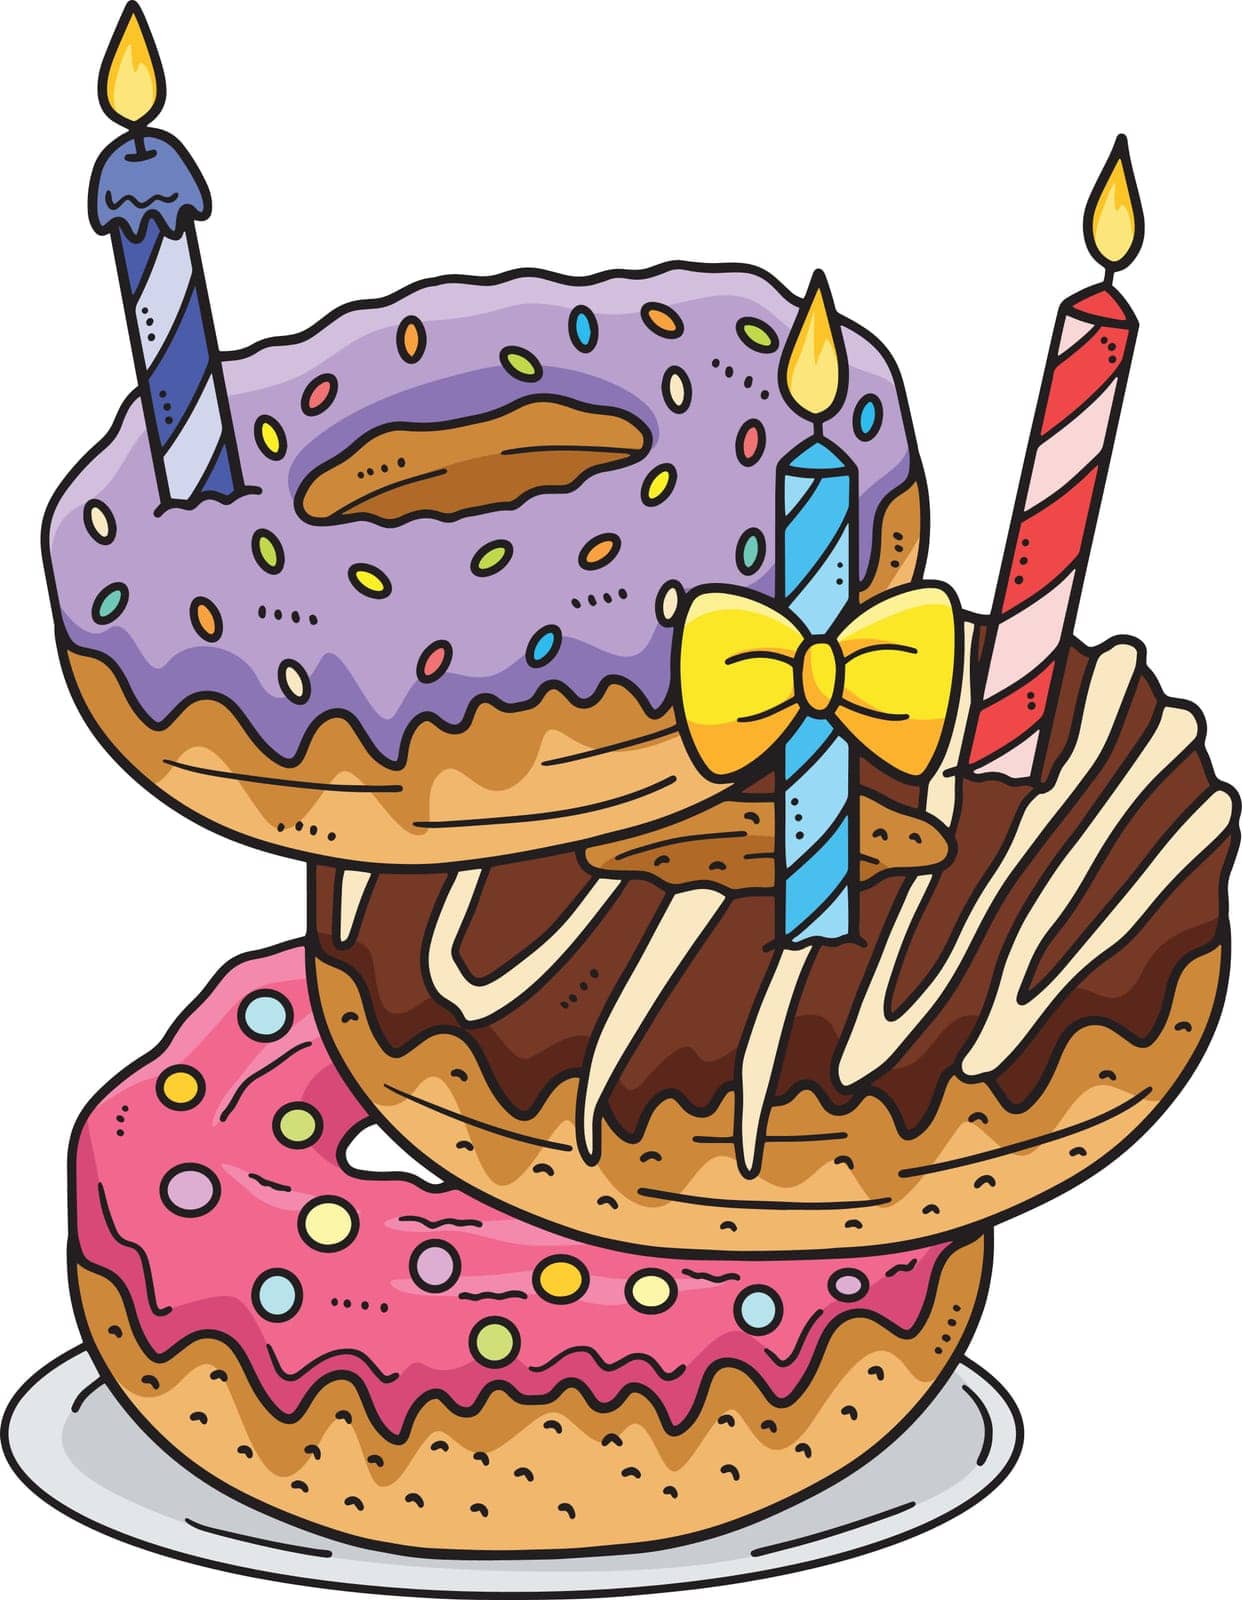 Birthday Stack of Donuts with Candle Clipart by abbydesign